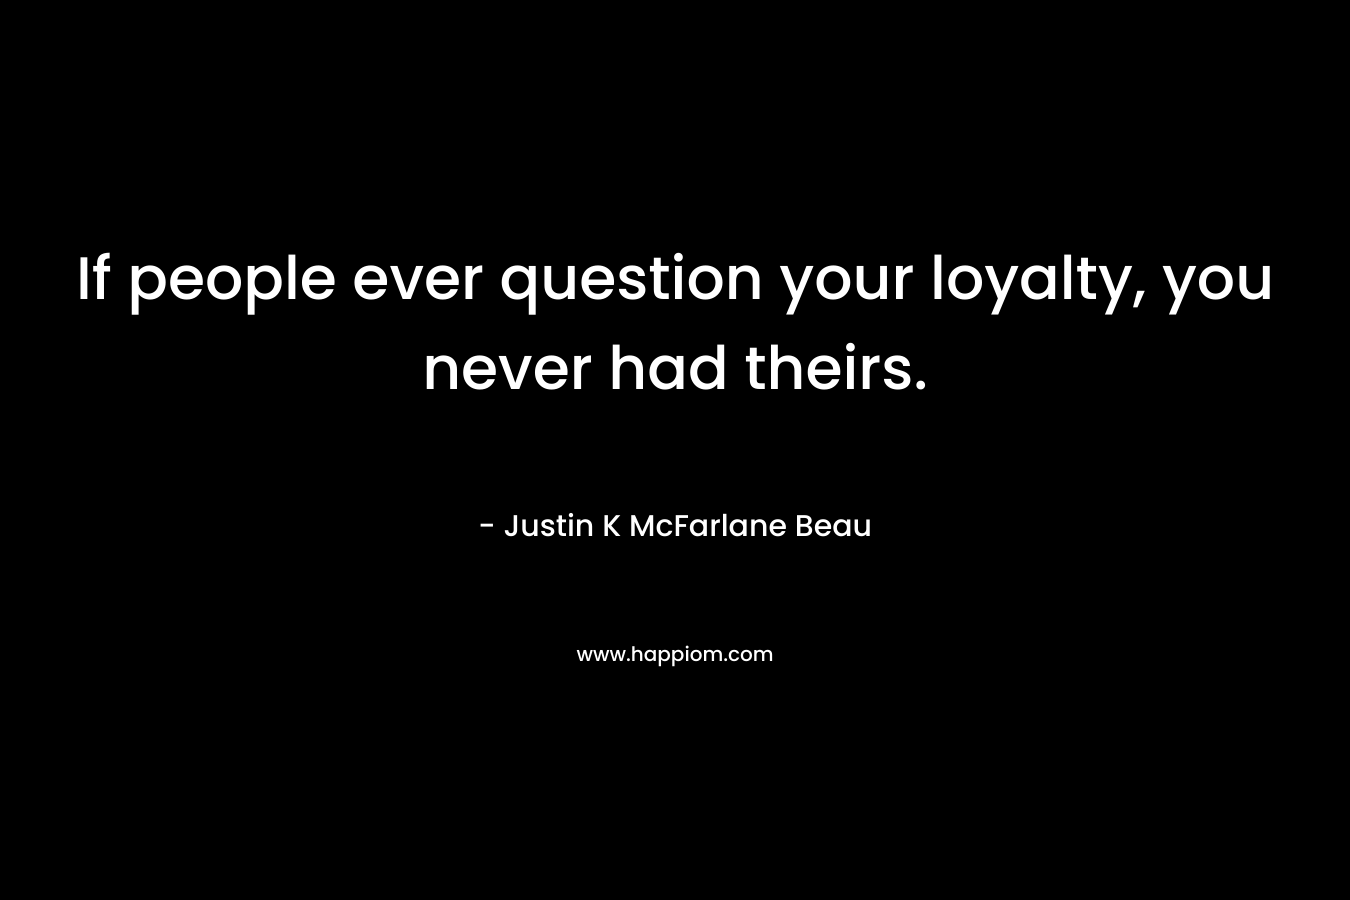 If people ever question your loyalty, you never had theirs. – Justin K McFarlane Beau